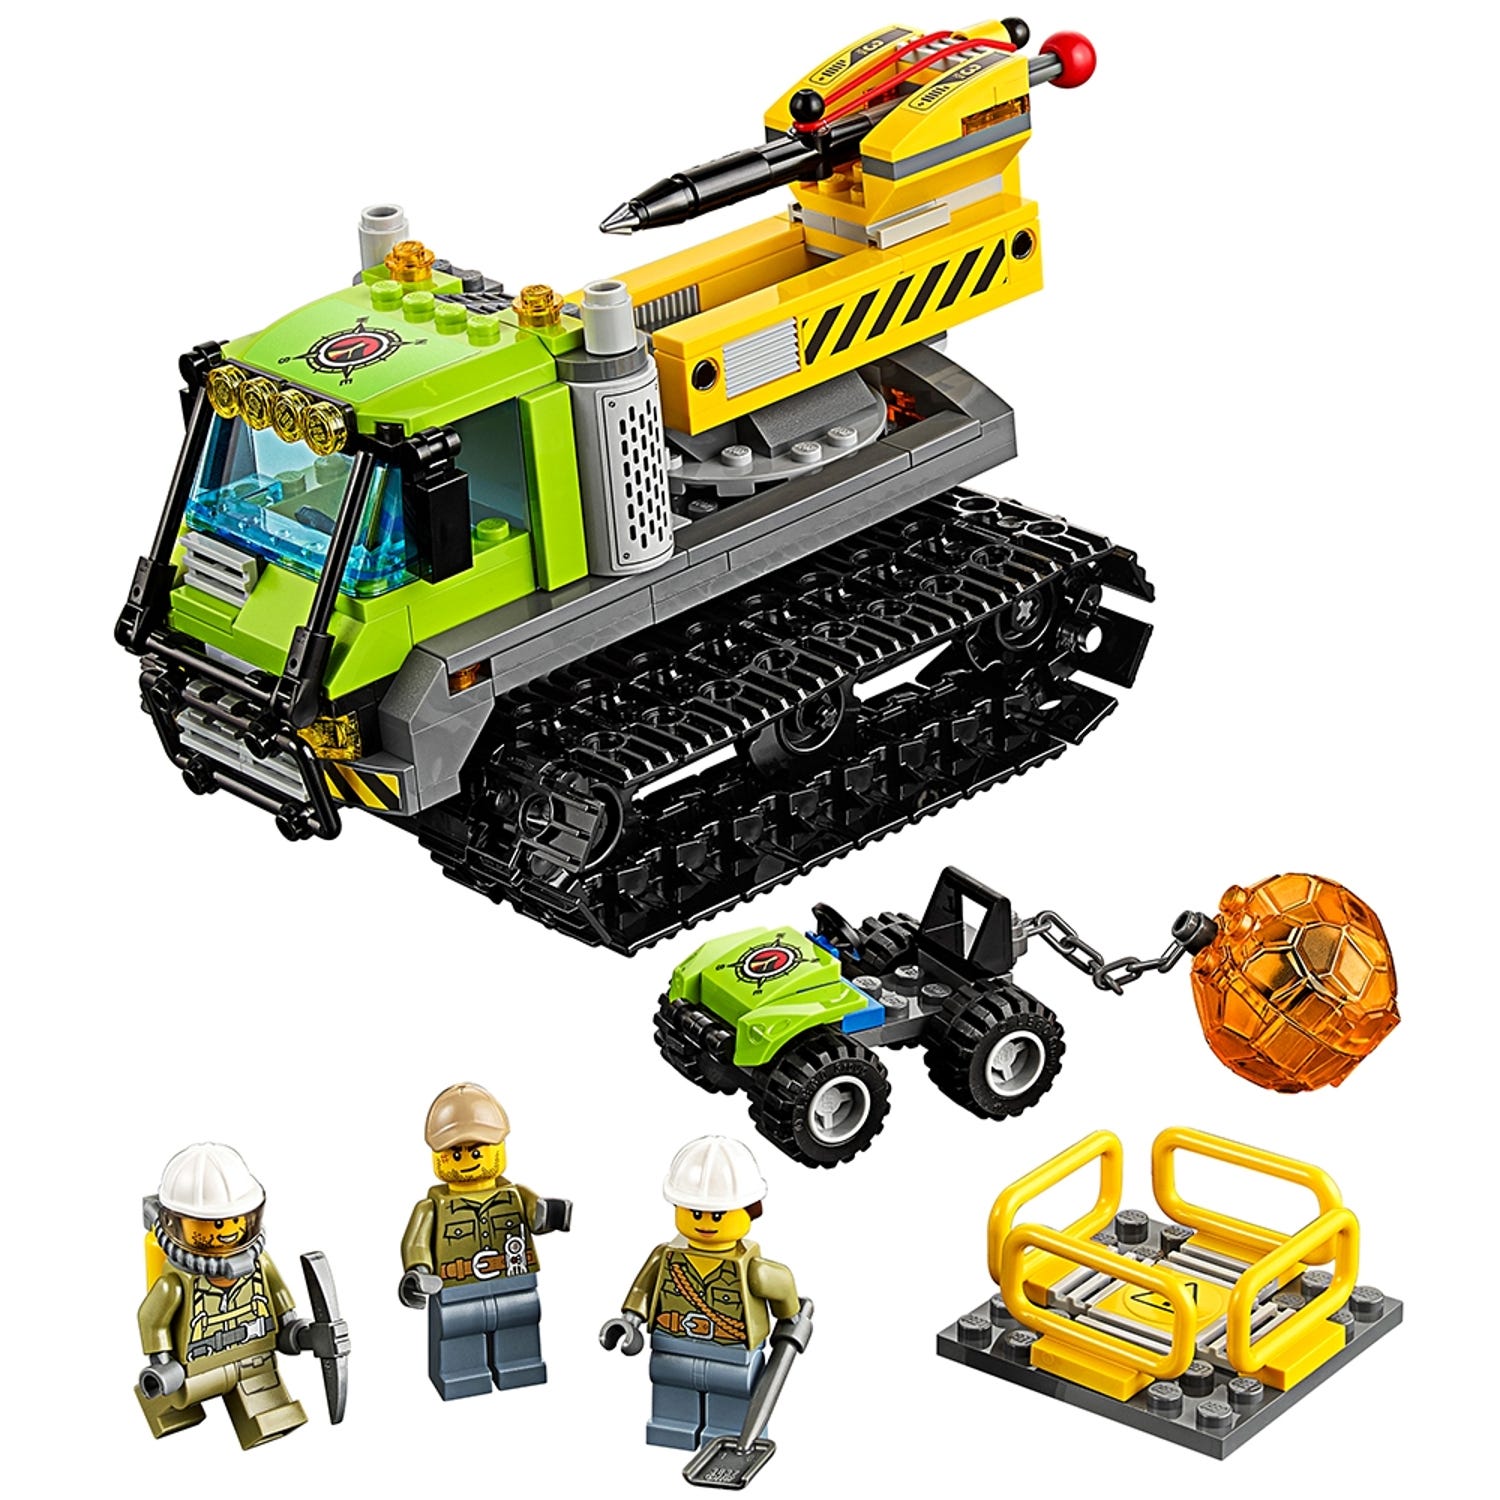 Volcano Crawler 60122 | Buy online at the Official LEGO® Shop US